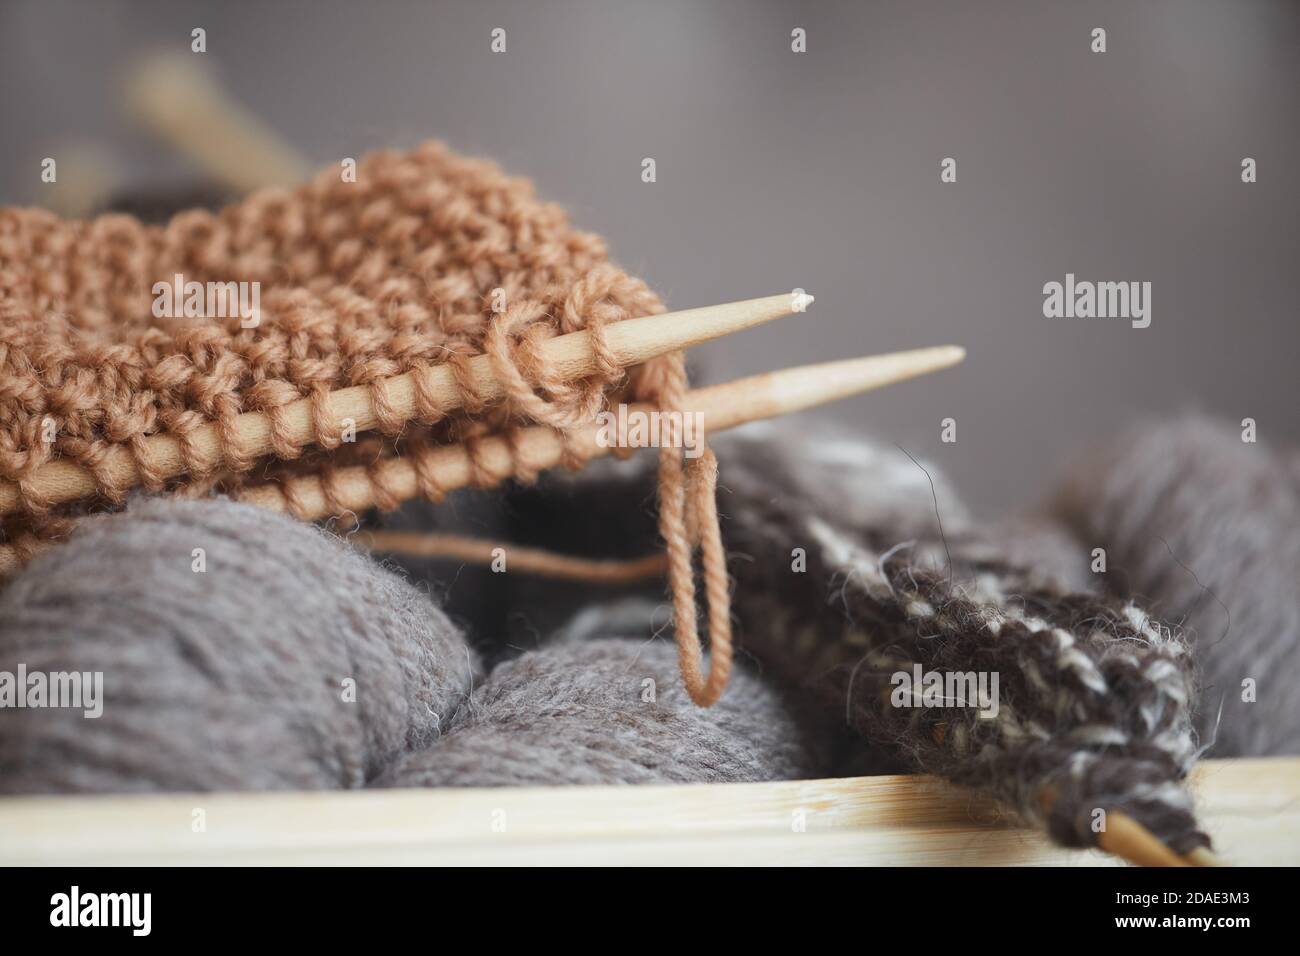 Close-up of yarn and needles for knitting work Stock Photo